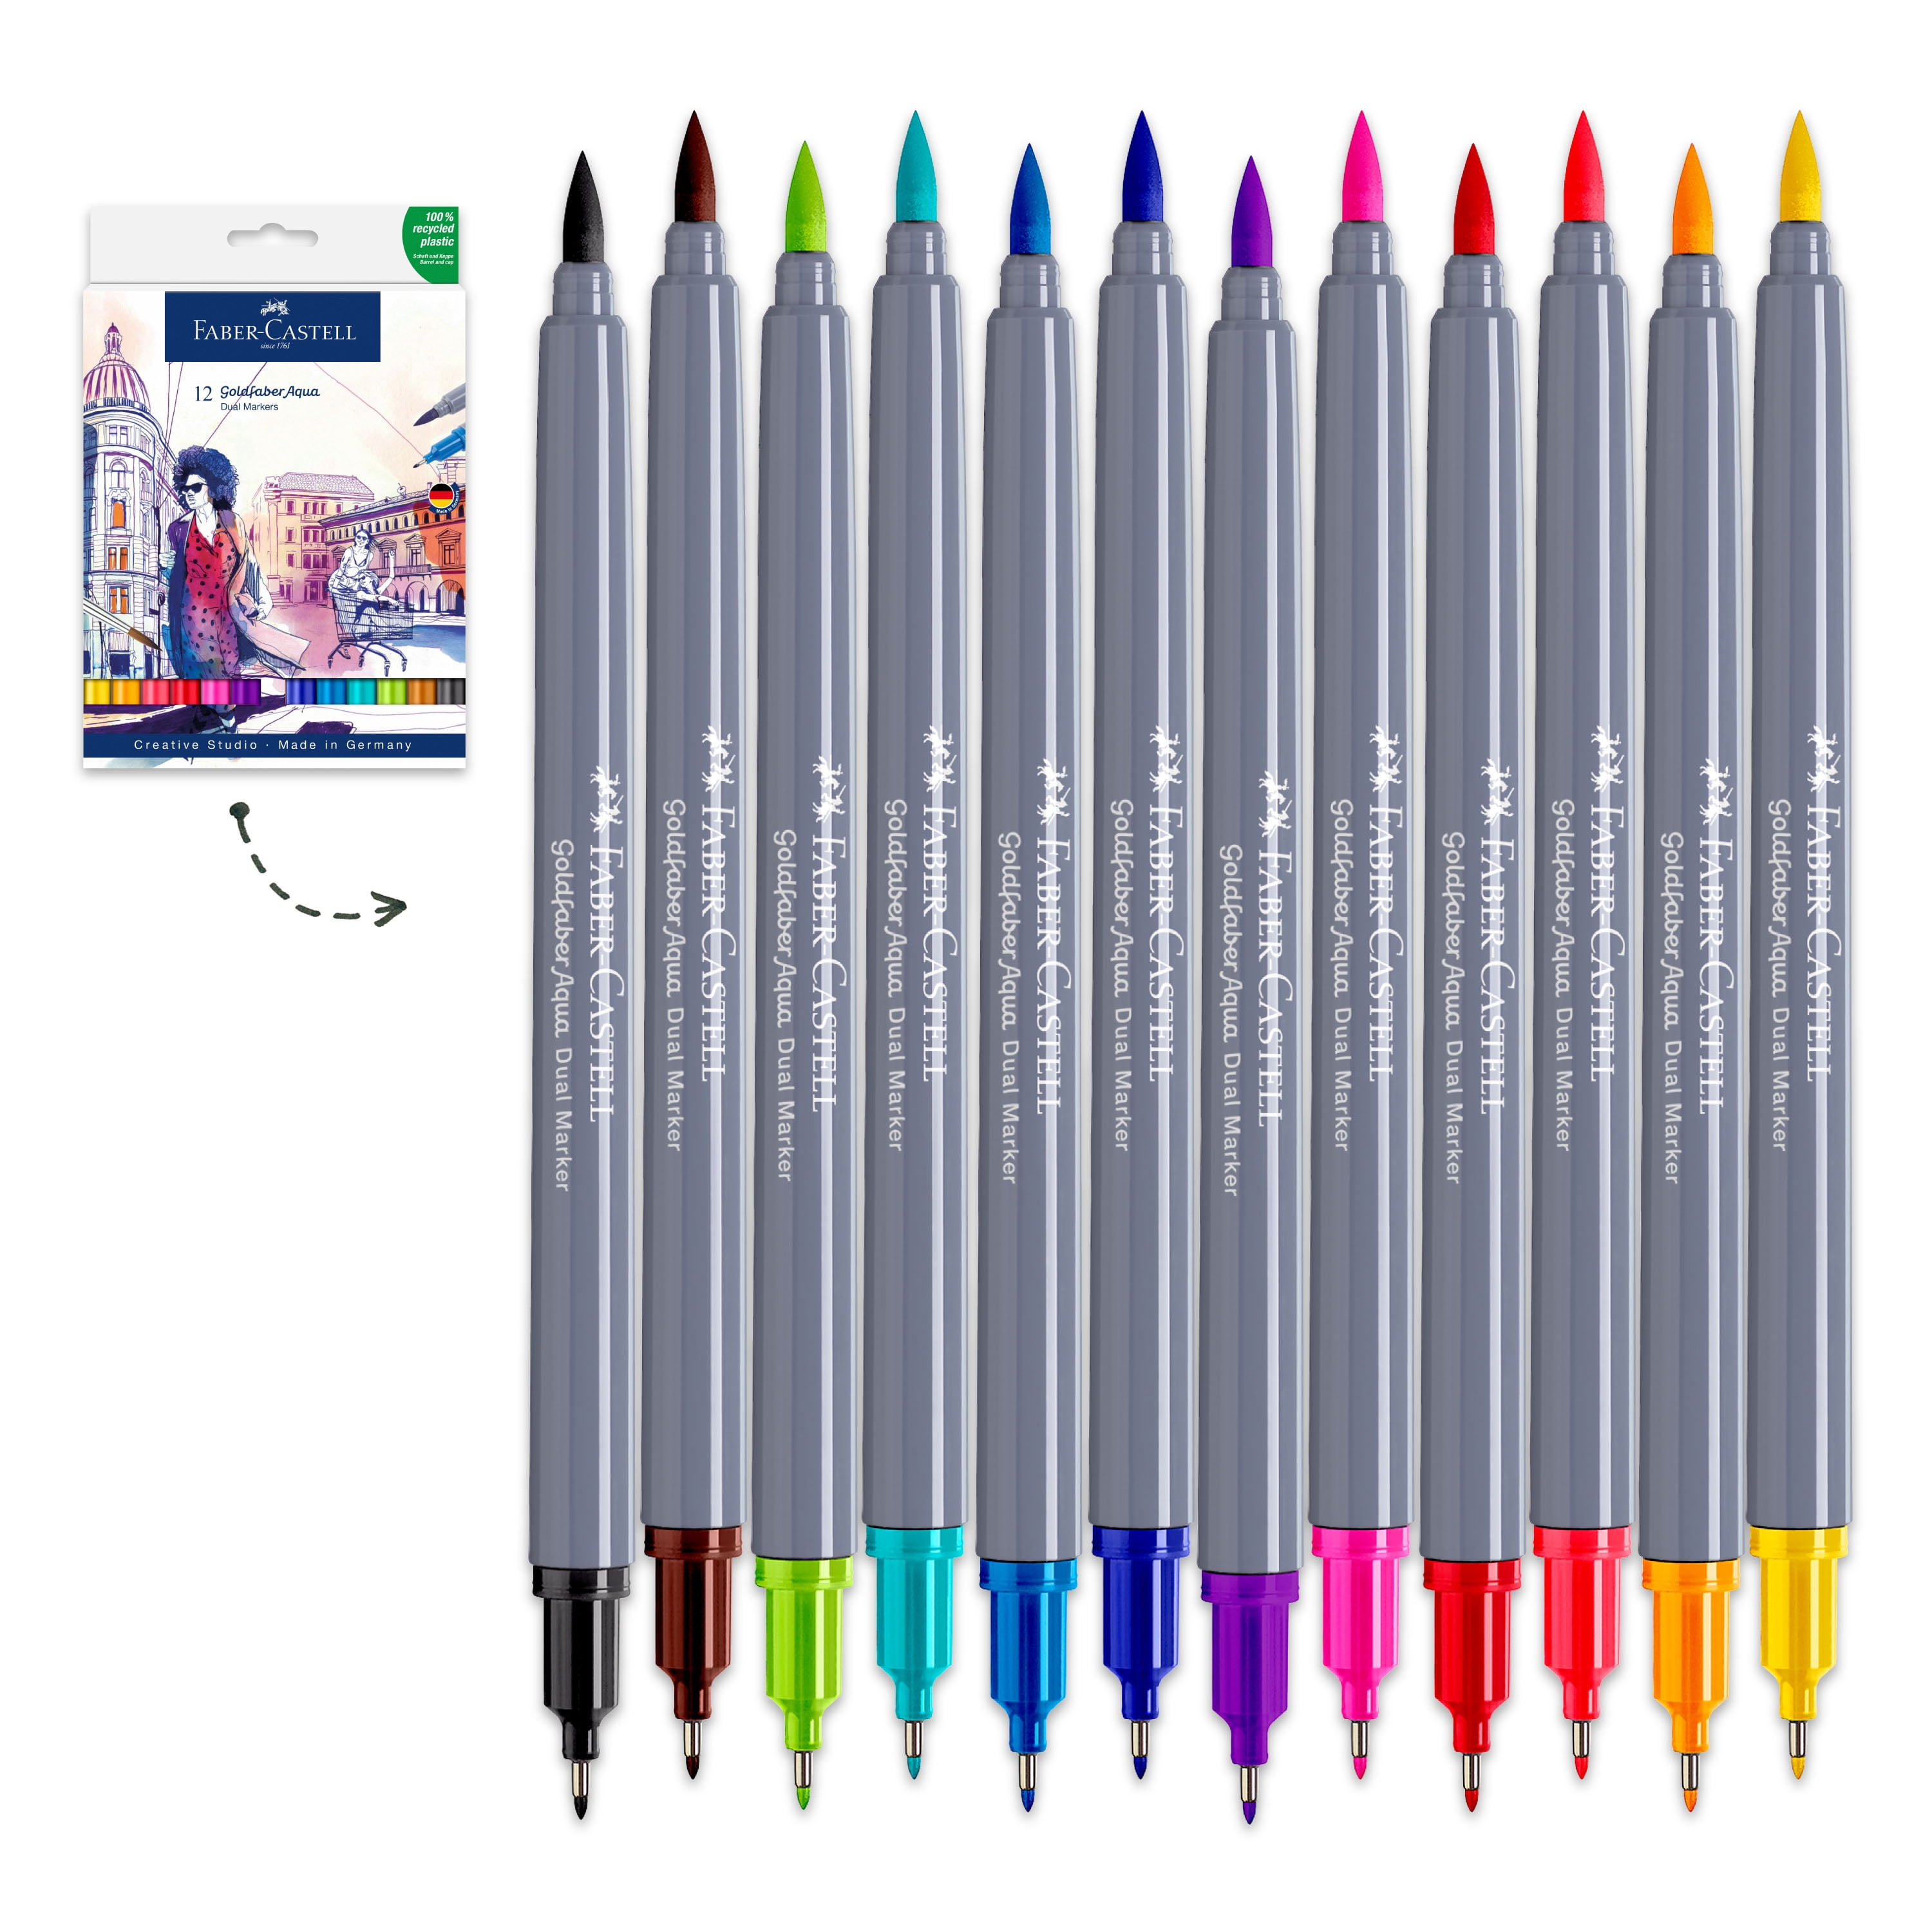 Faber-Castell 6-count Goldfaber Aqua Dual Markers Shades Of Grey in the  Craft Supplies department at